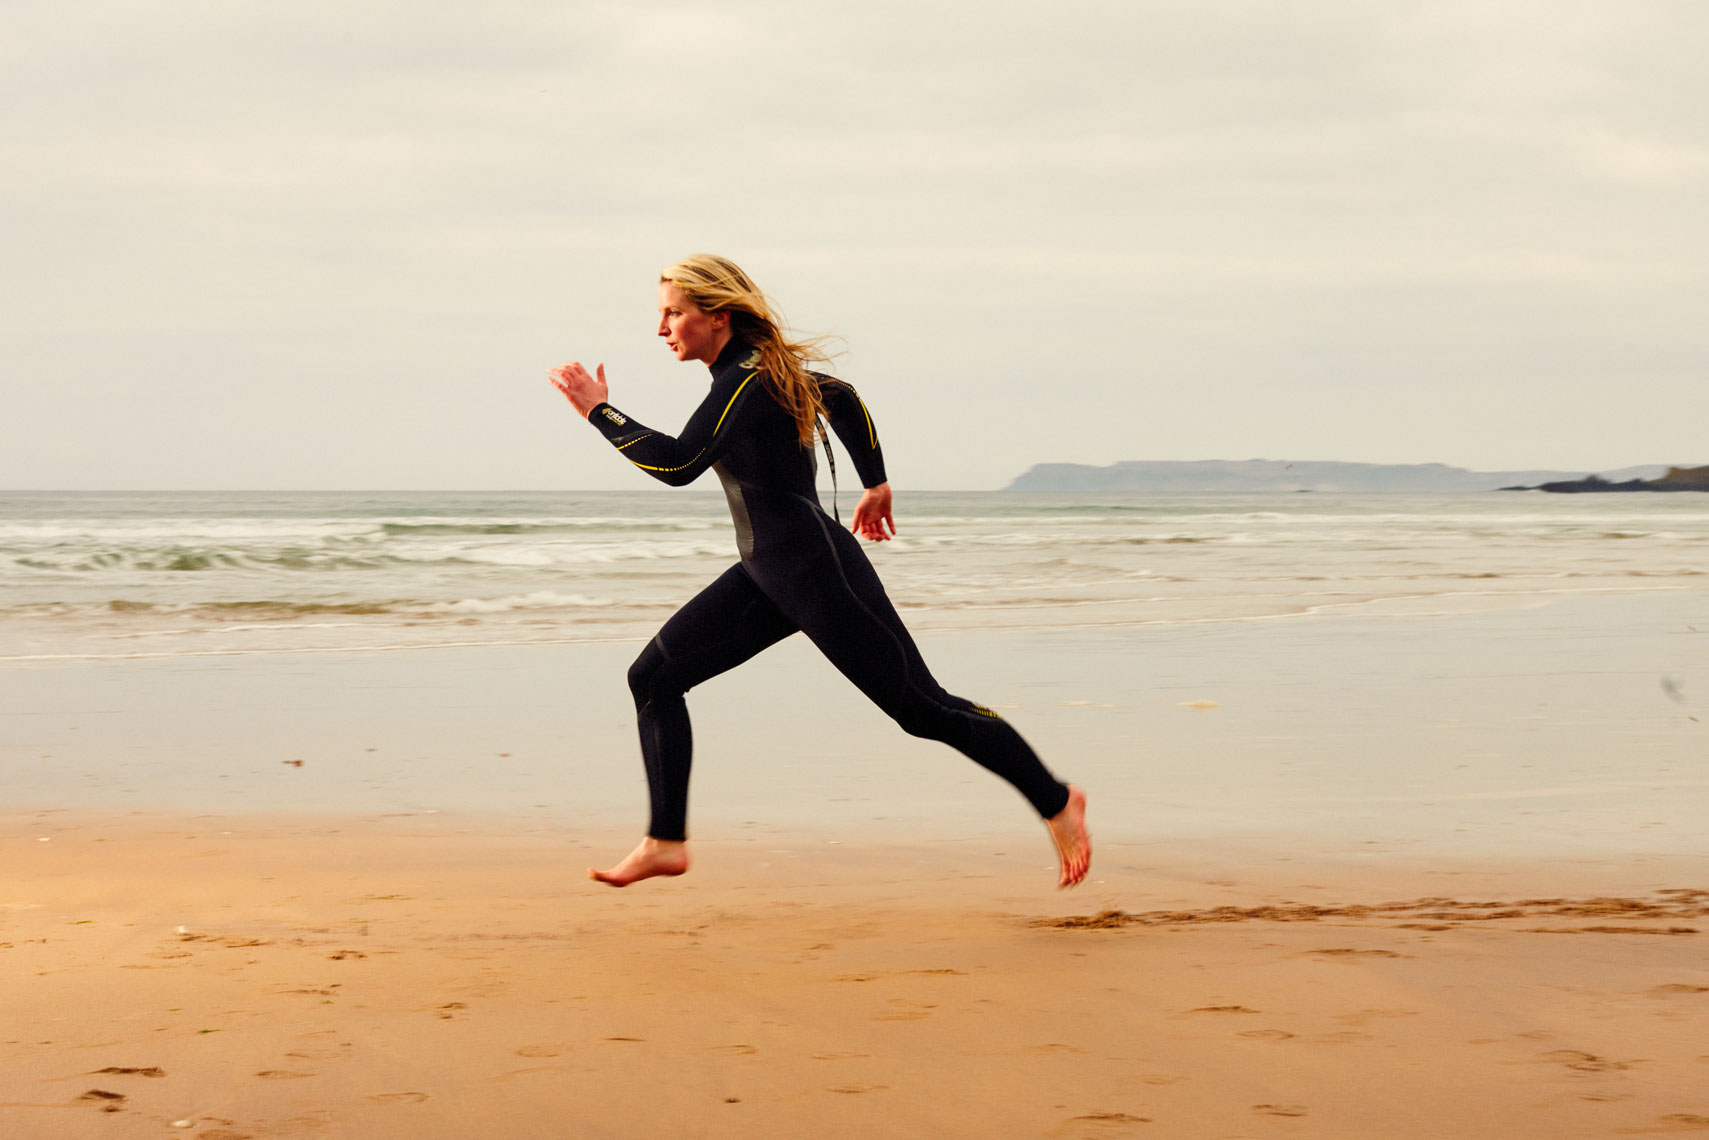 athlete portraits: surfing in ireland and embracing life